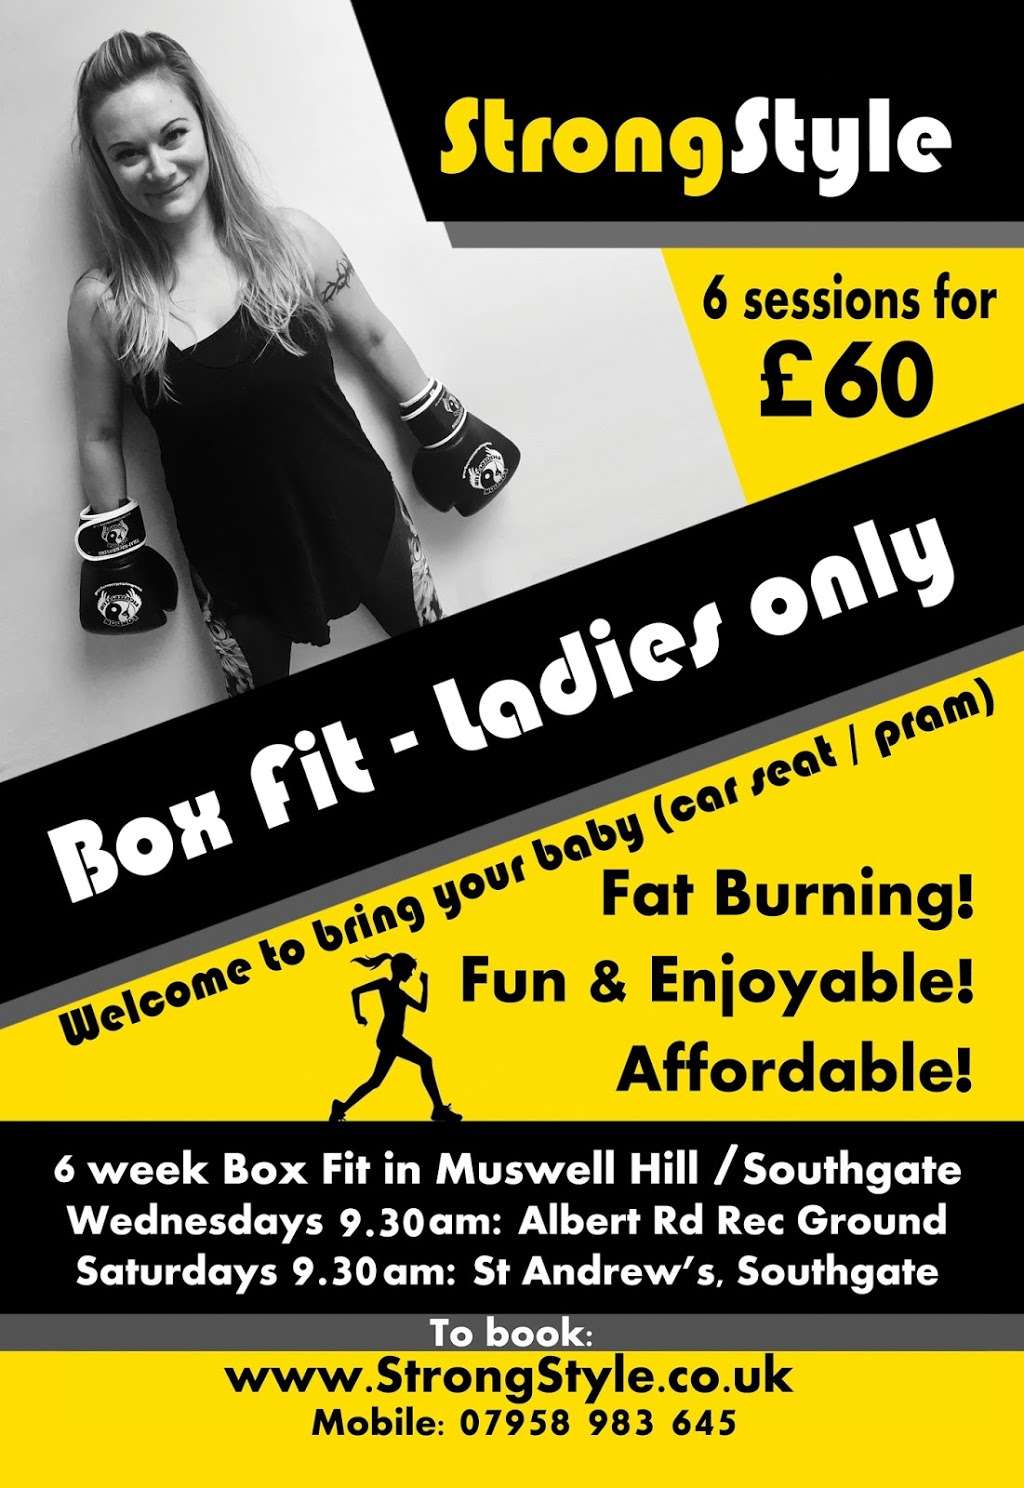 StrongStyle ladies only Box Fit classes | 29 Arlow Rd, London N21 3JS, UK | Phone: 07958 983645